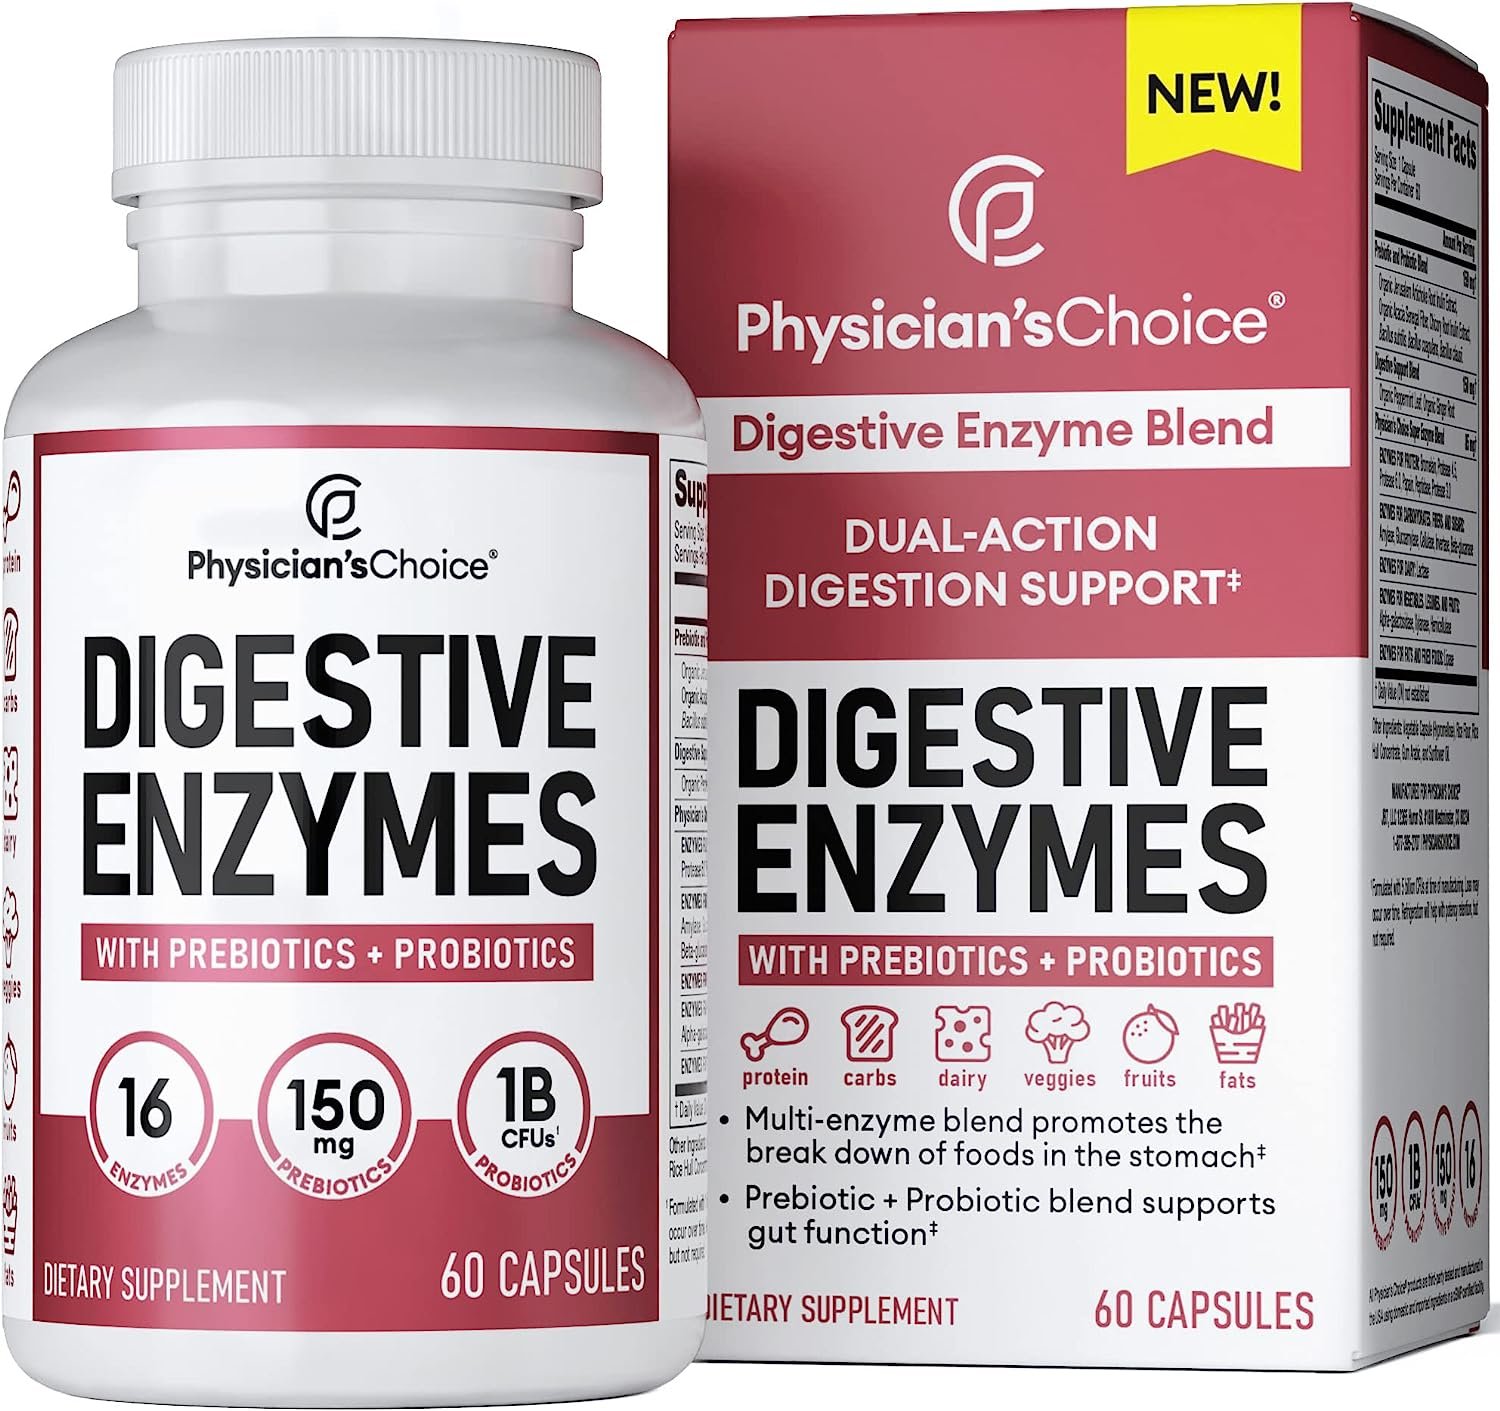 Physician’s CHOICE Digestive Enzymes – Multi Enzymes Review